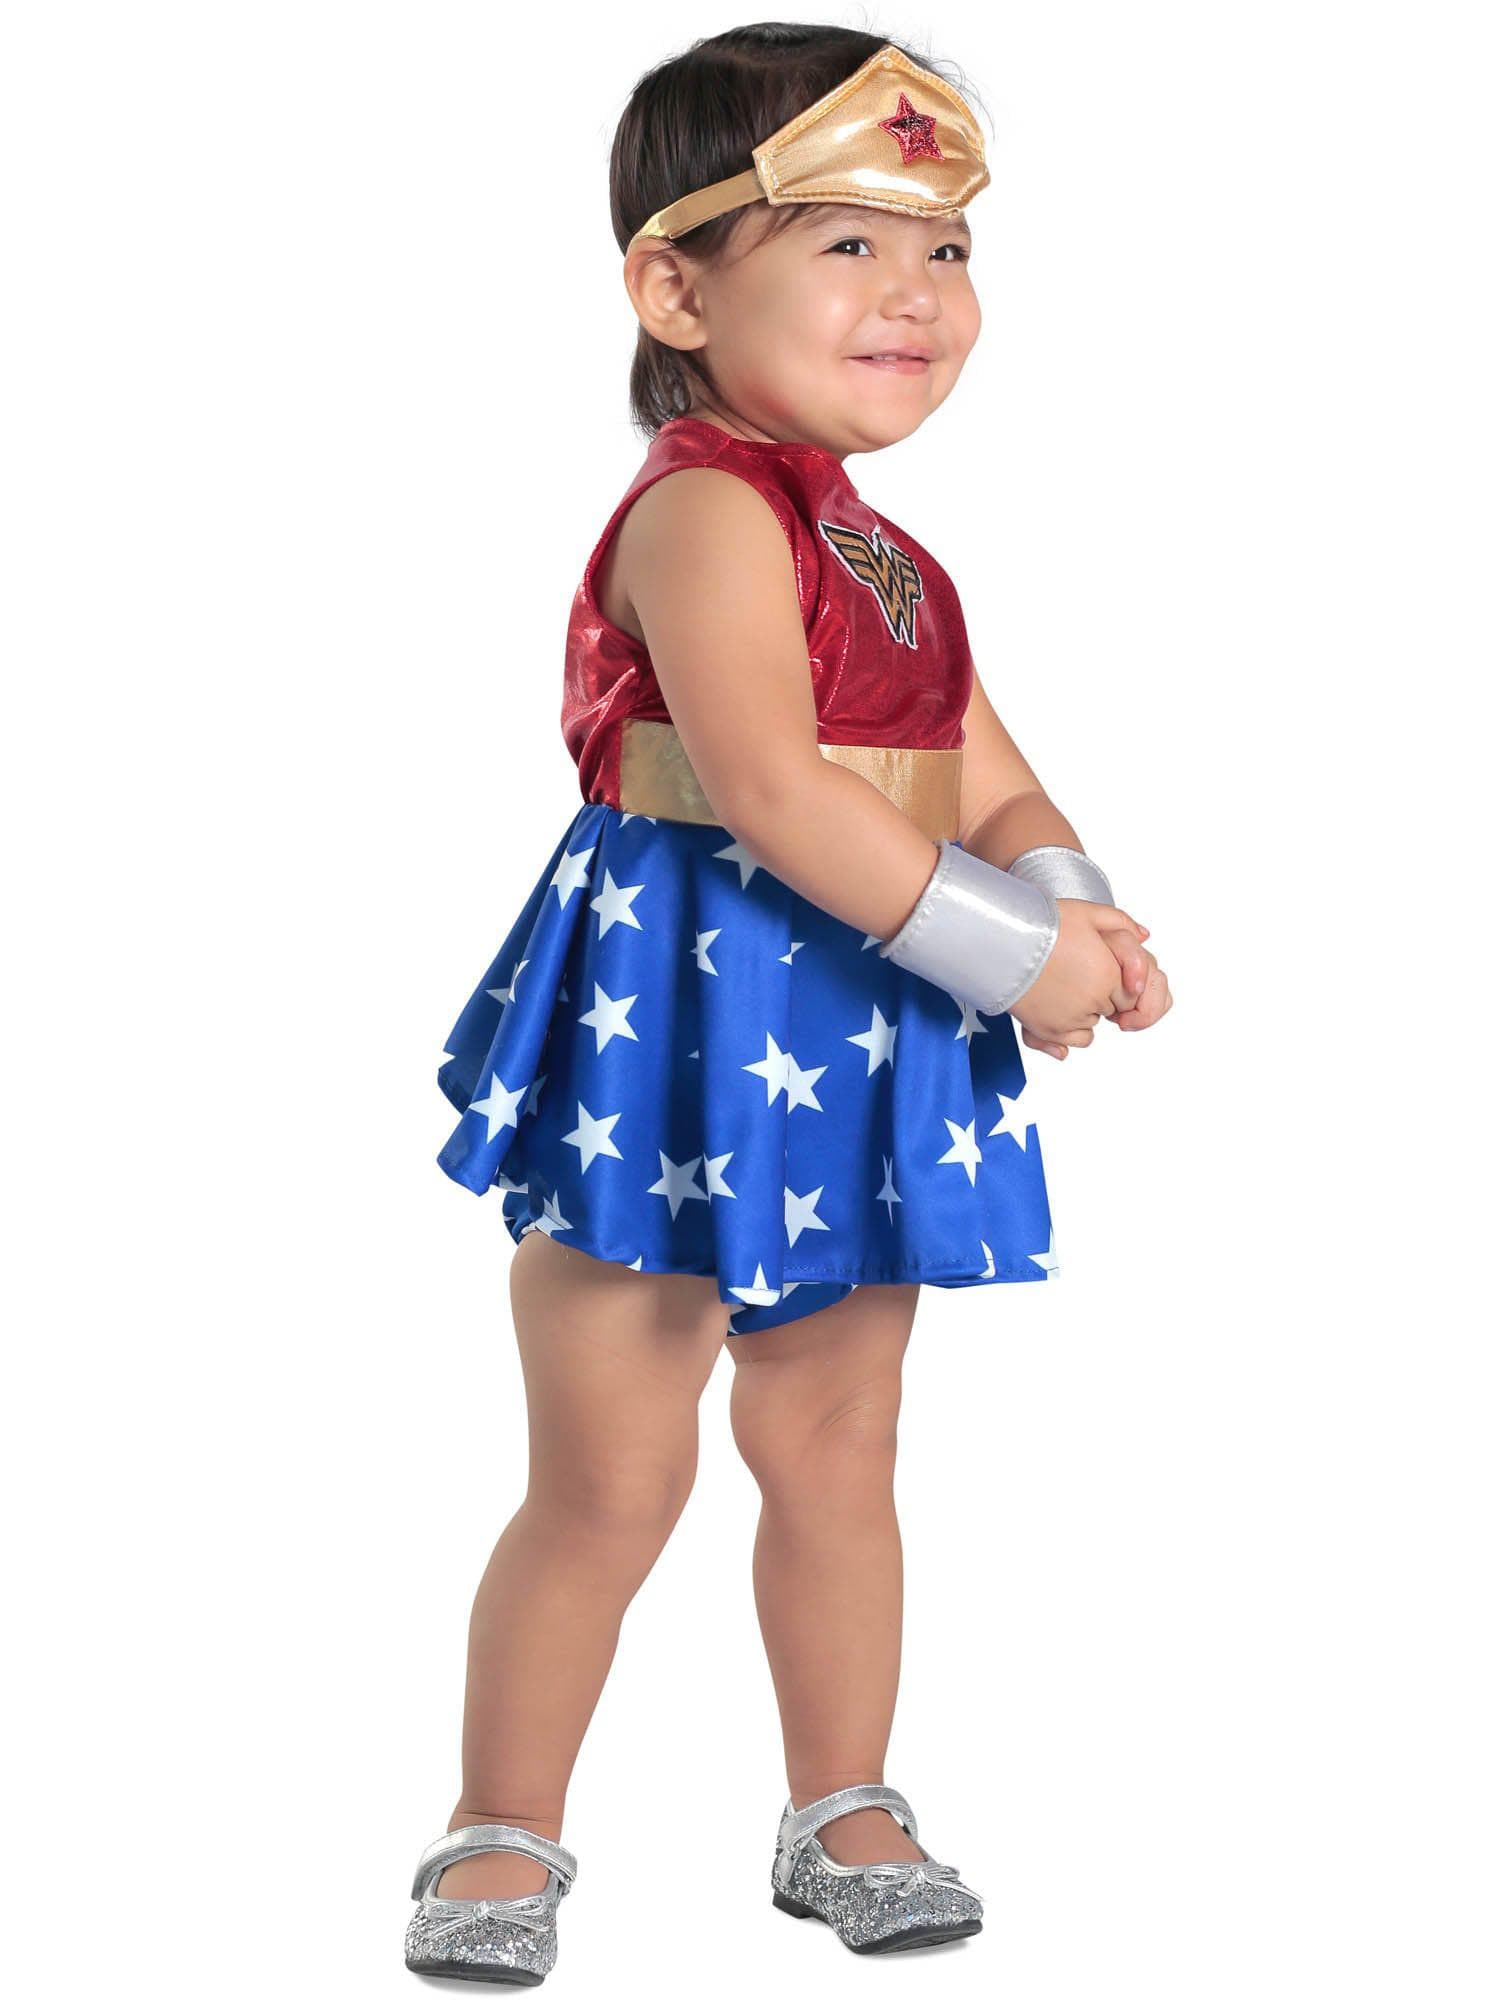 Baby/Toddler Justice League Wonder Woman Dress Costume - costumes.com